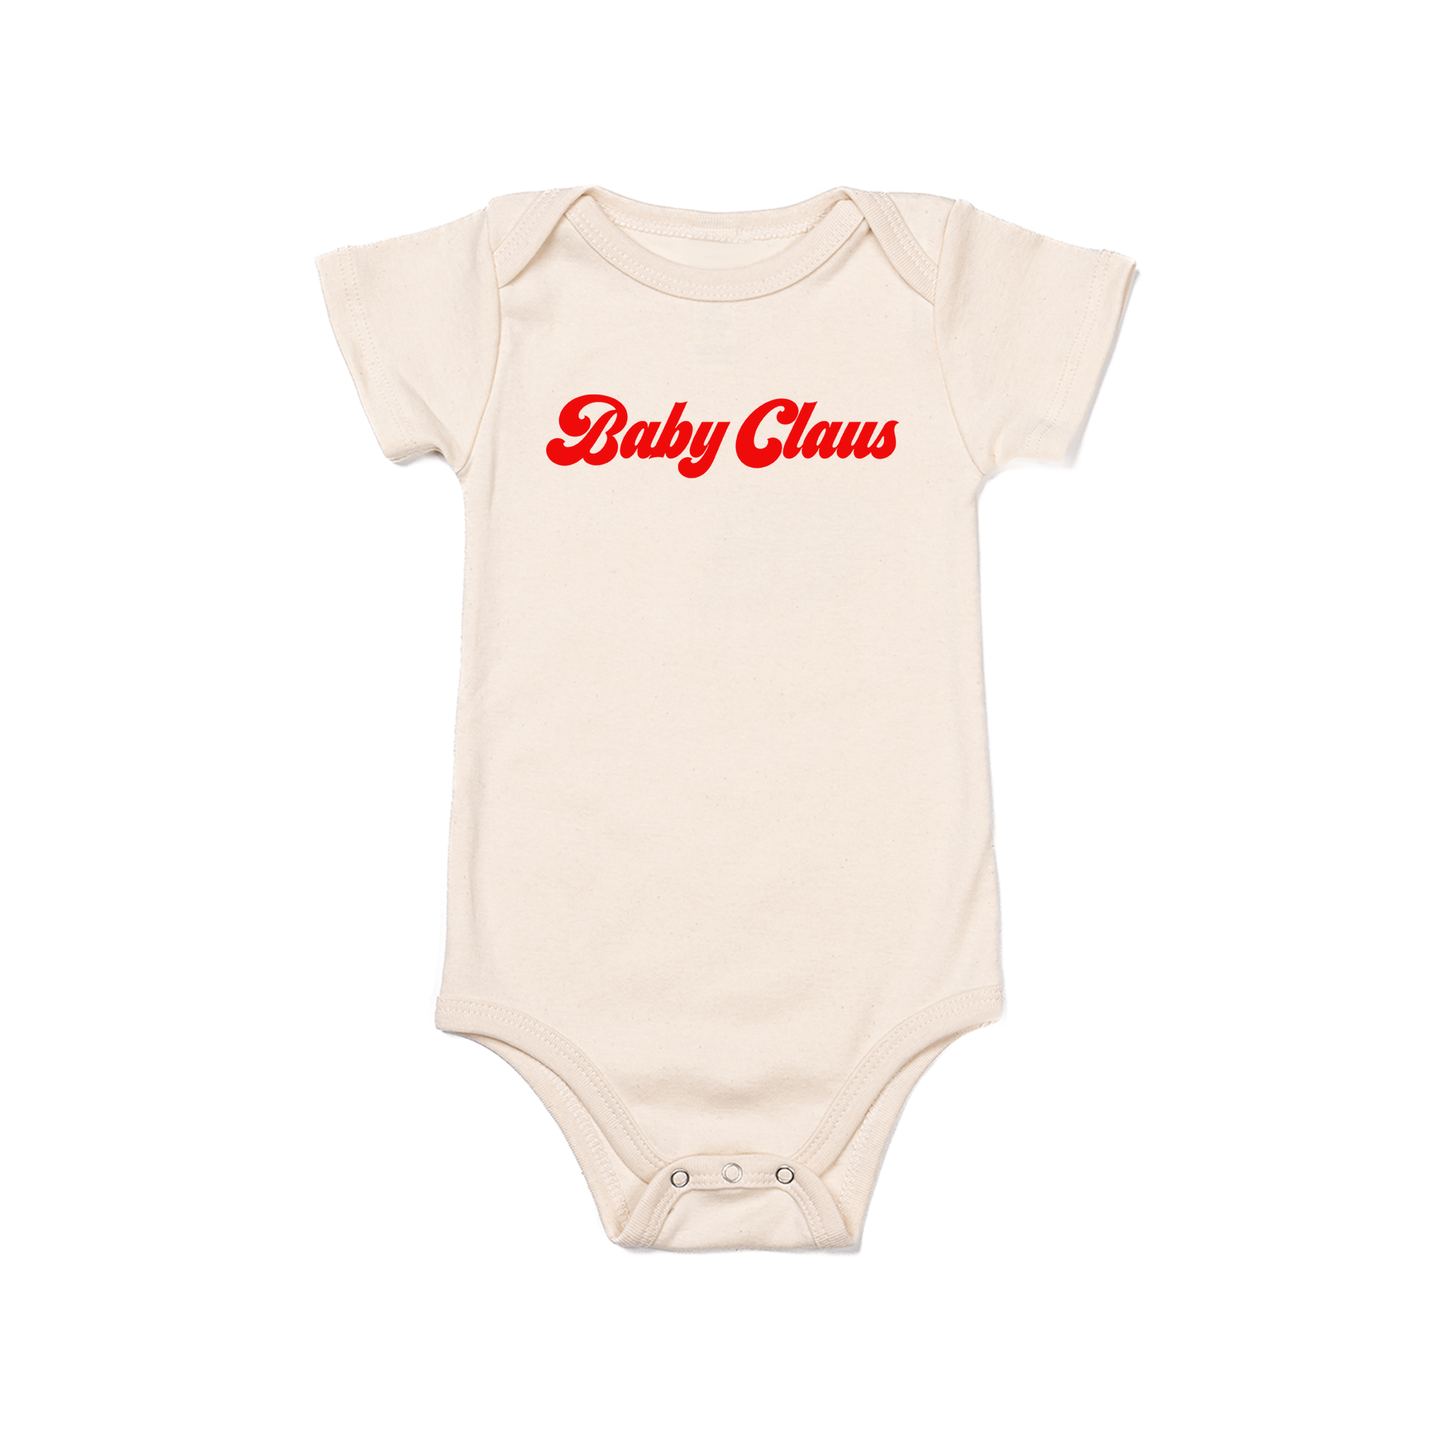 Baby Claus (Red) - Bodysuit (Natural, Short Sleeve)